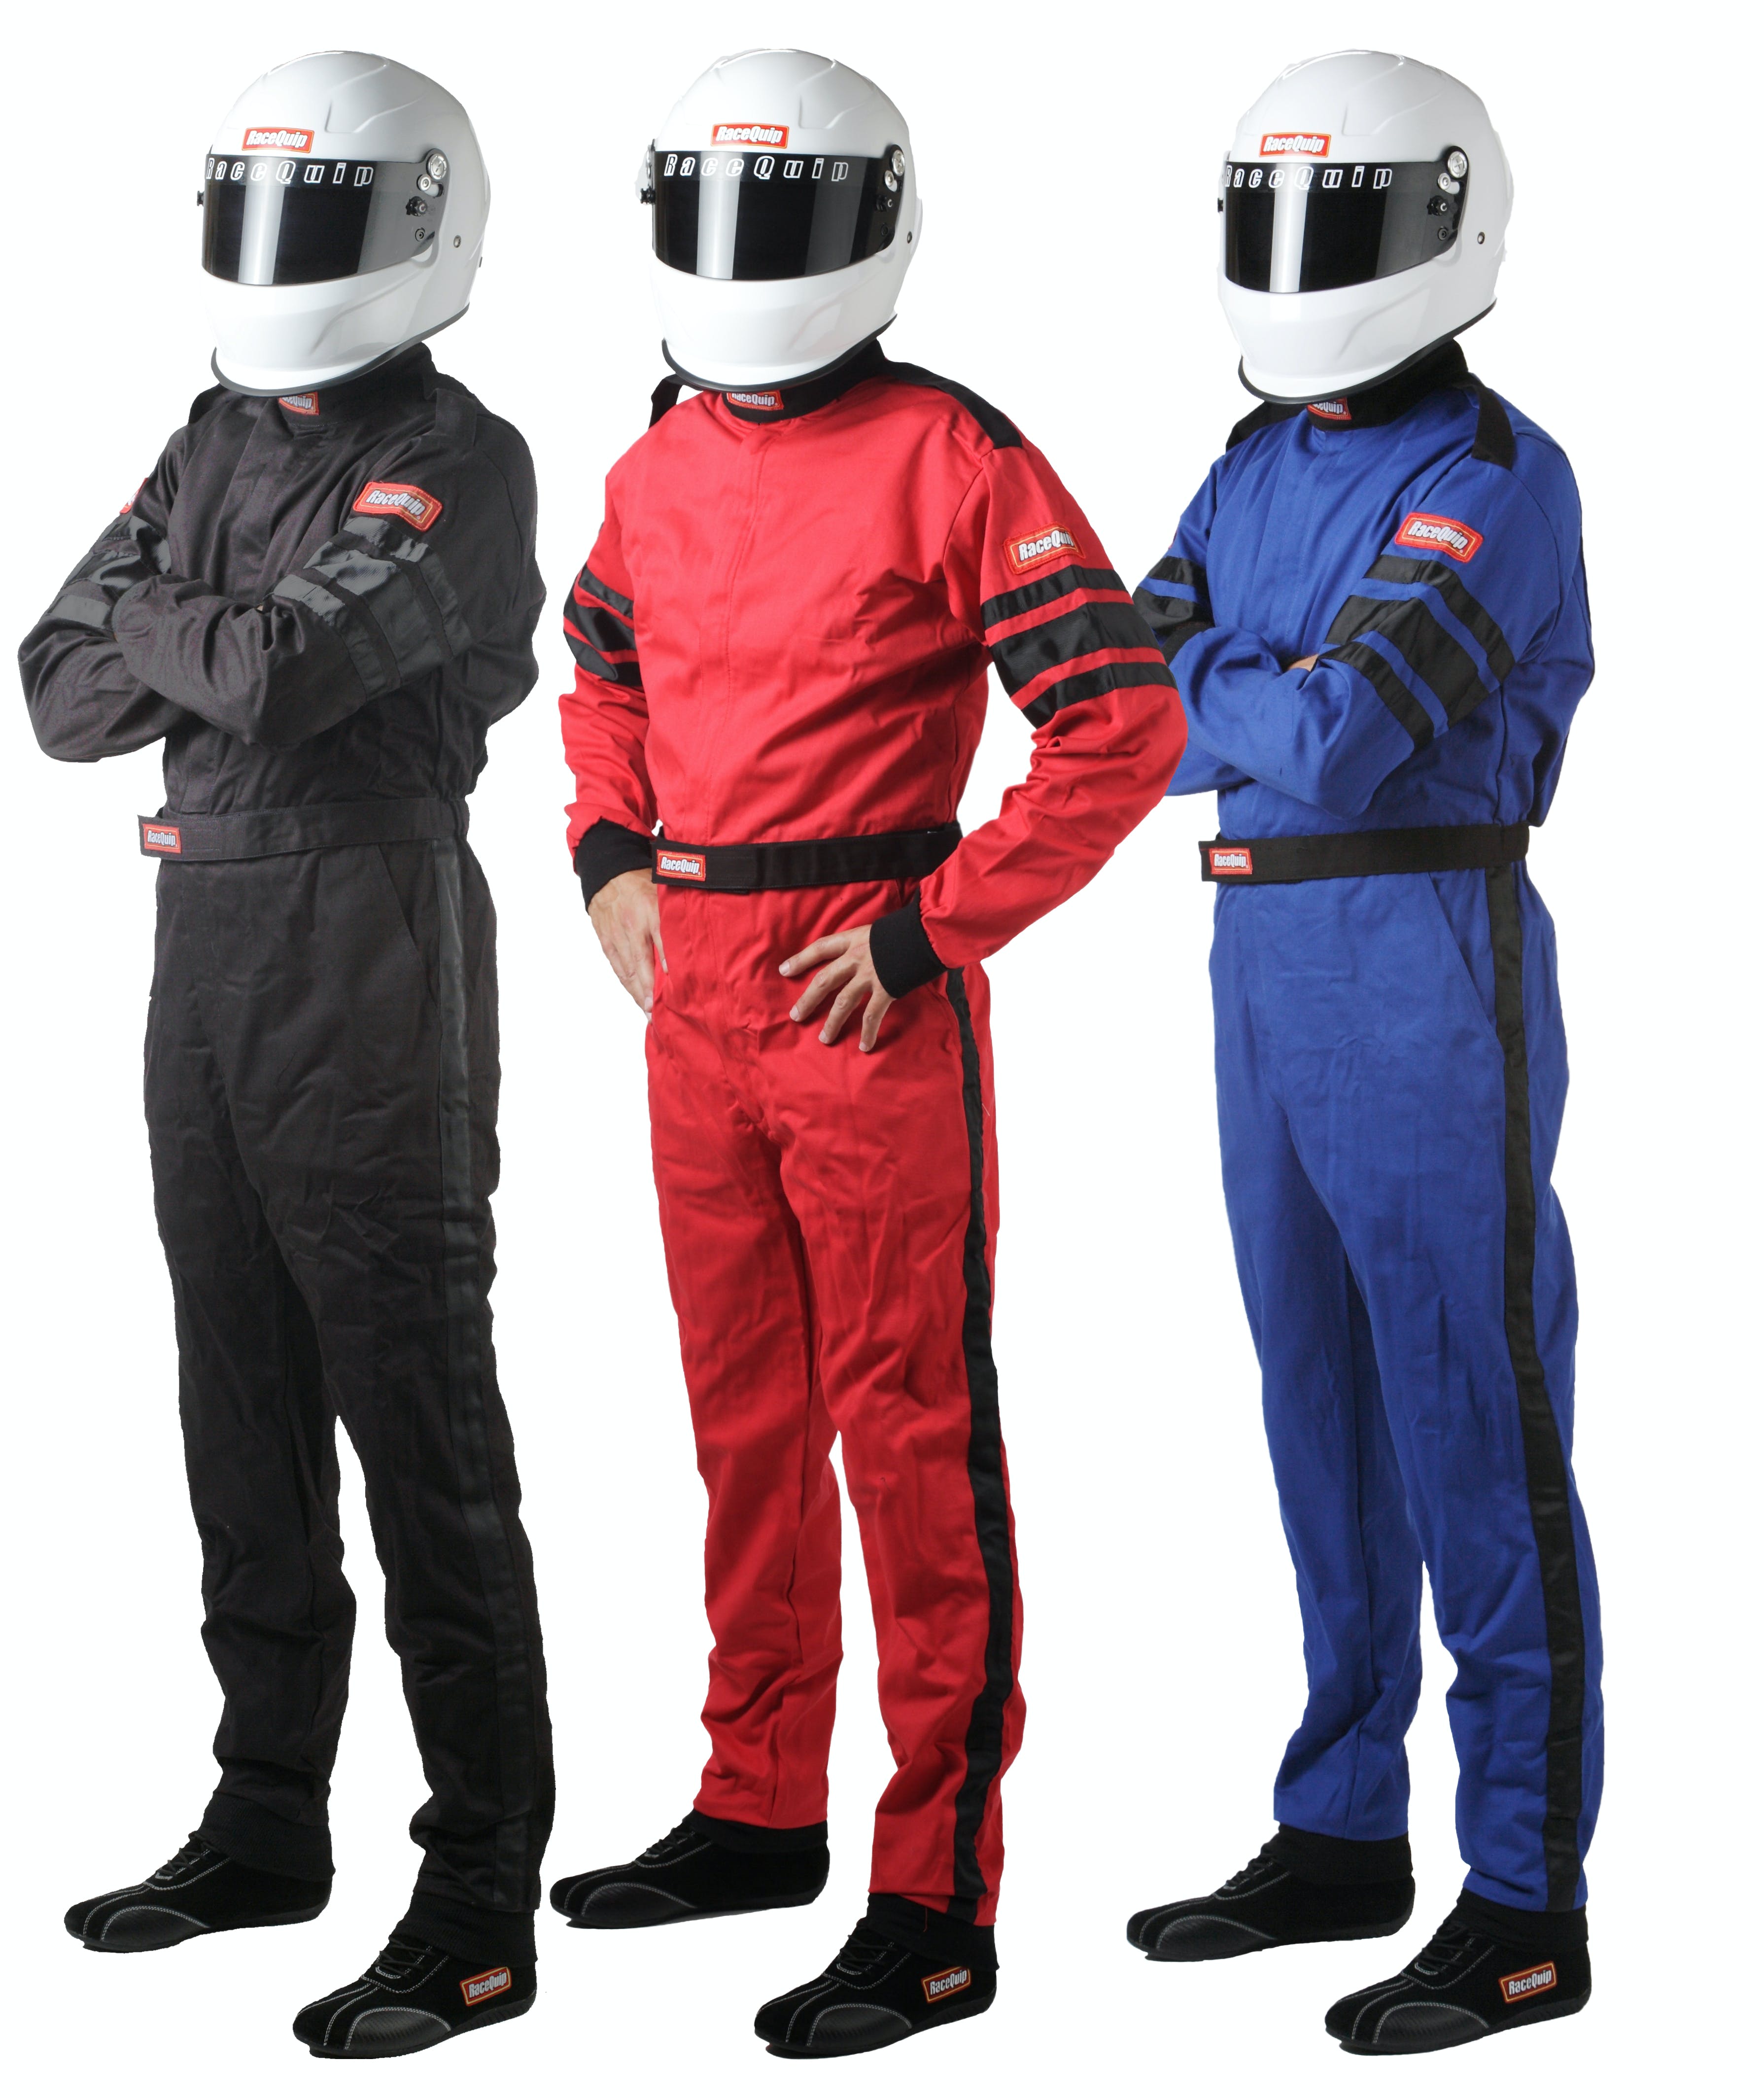 RaceQuip 110005 SFI-1 Pyrovatex One-Piece Single-Layer Racing Fire Suit (Black, Large)